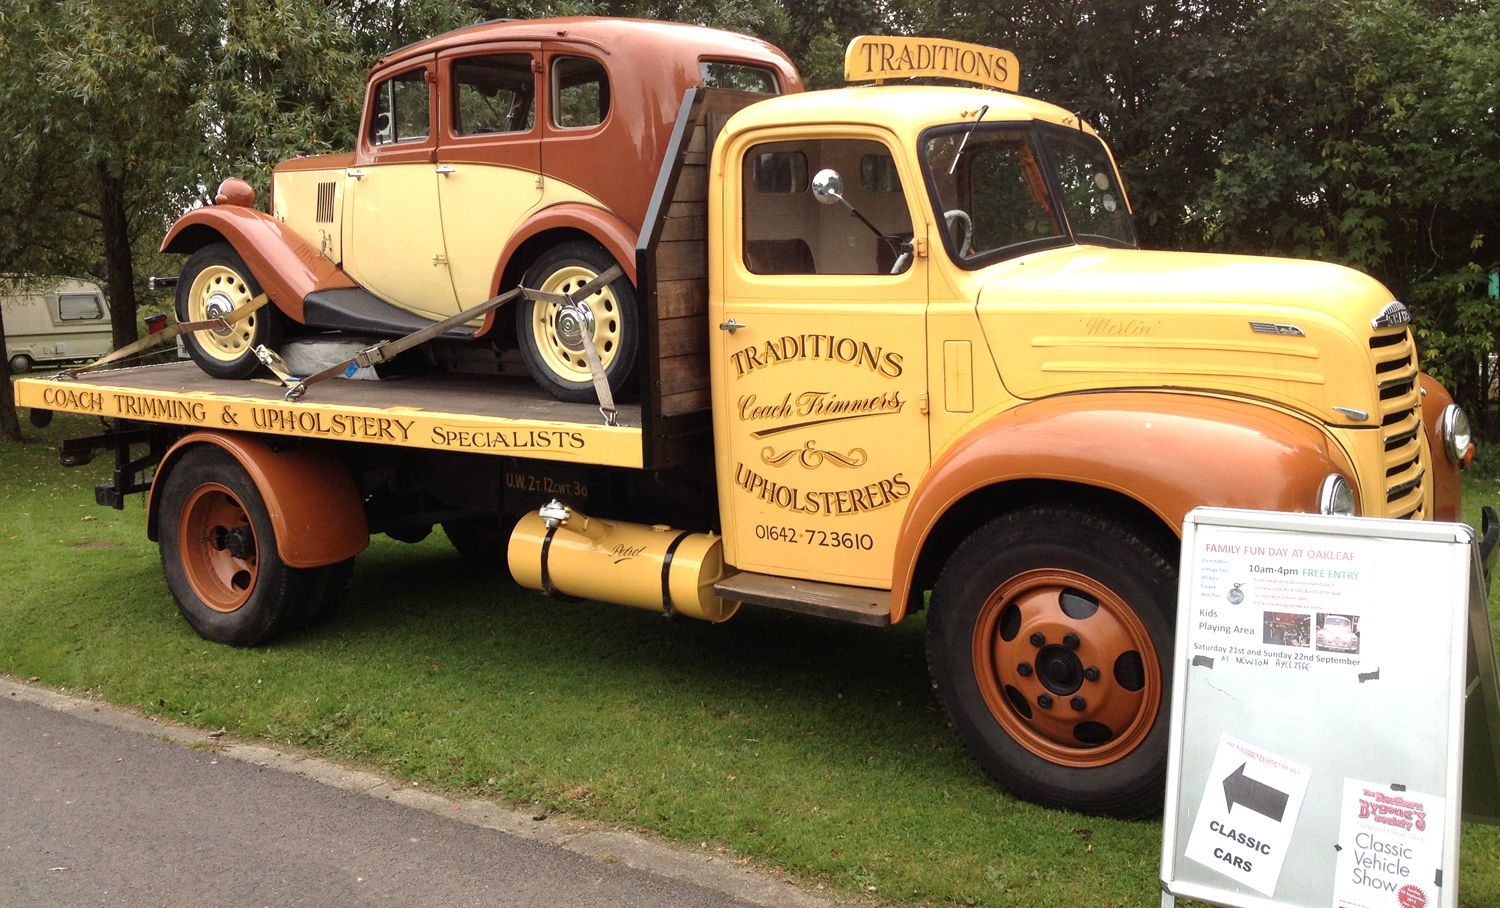 Aycliffe Vintage & Classic Vehicle Show